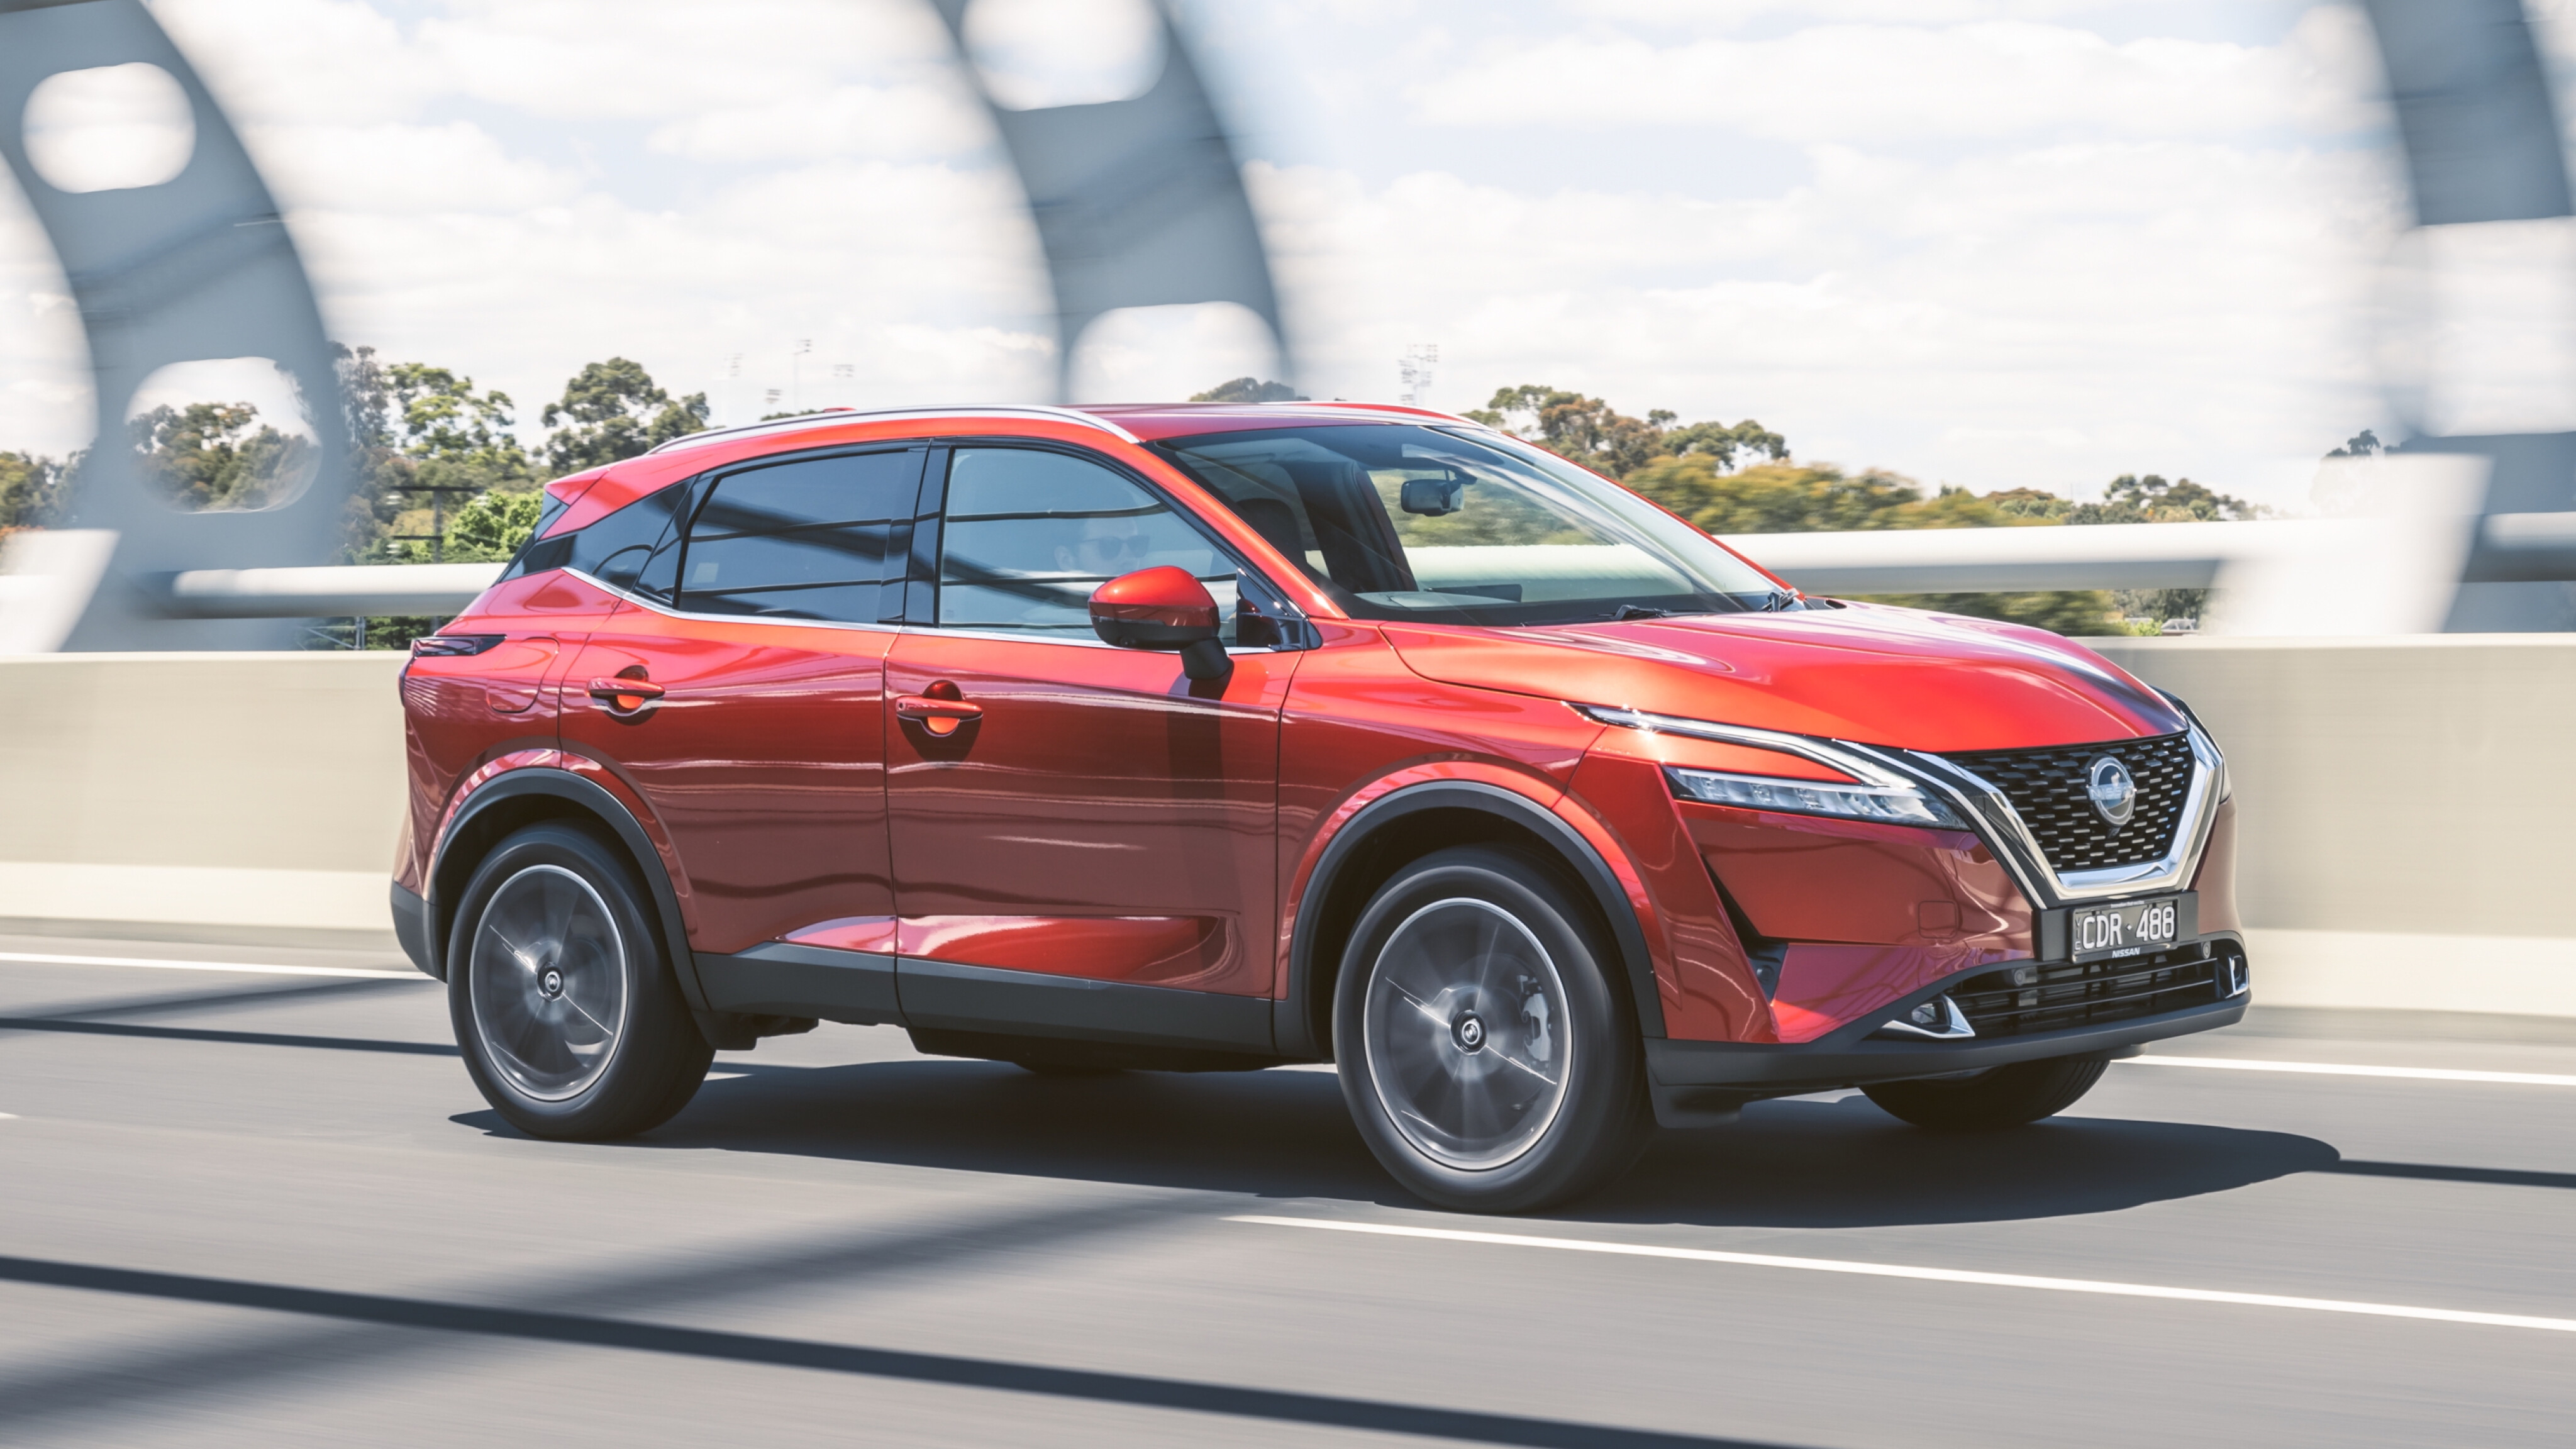 2023 Nissan Qashqai Arrives In Australia With 1.3-Liter Turbo And